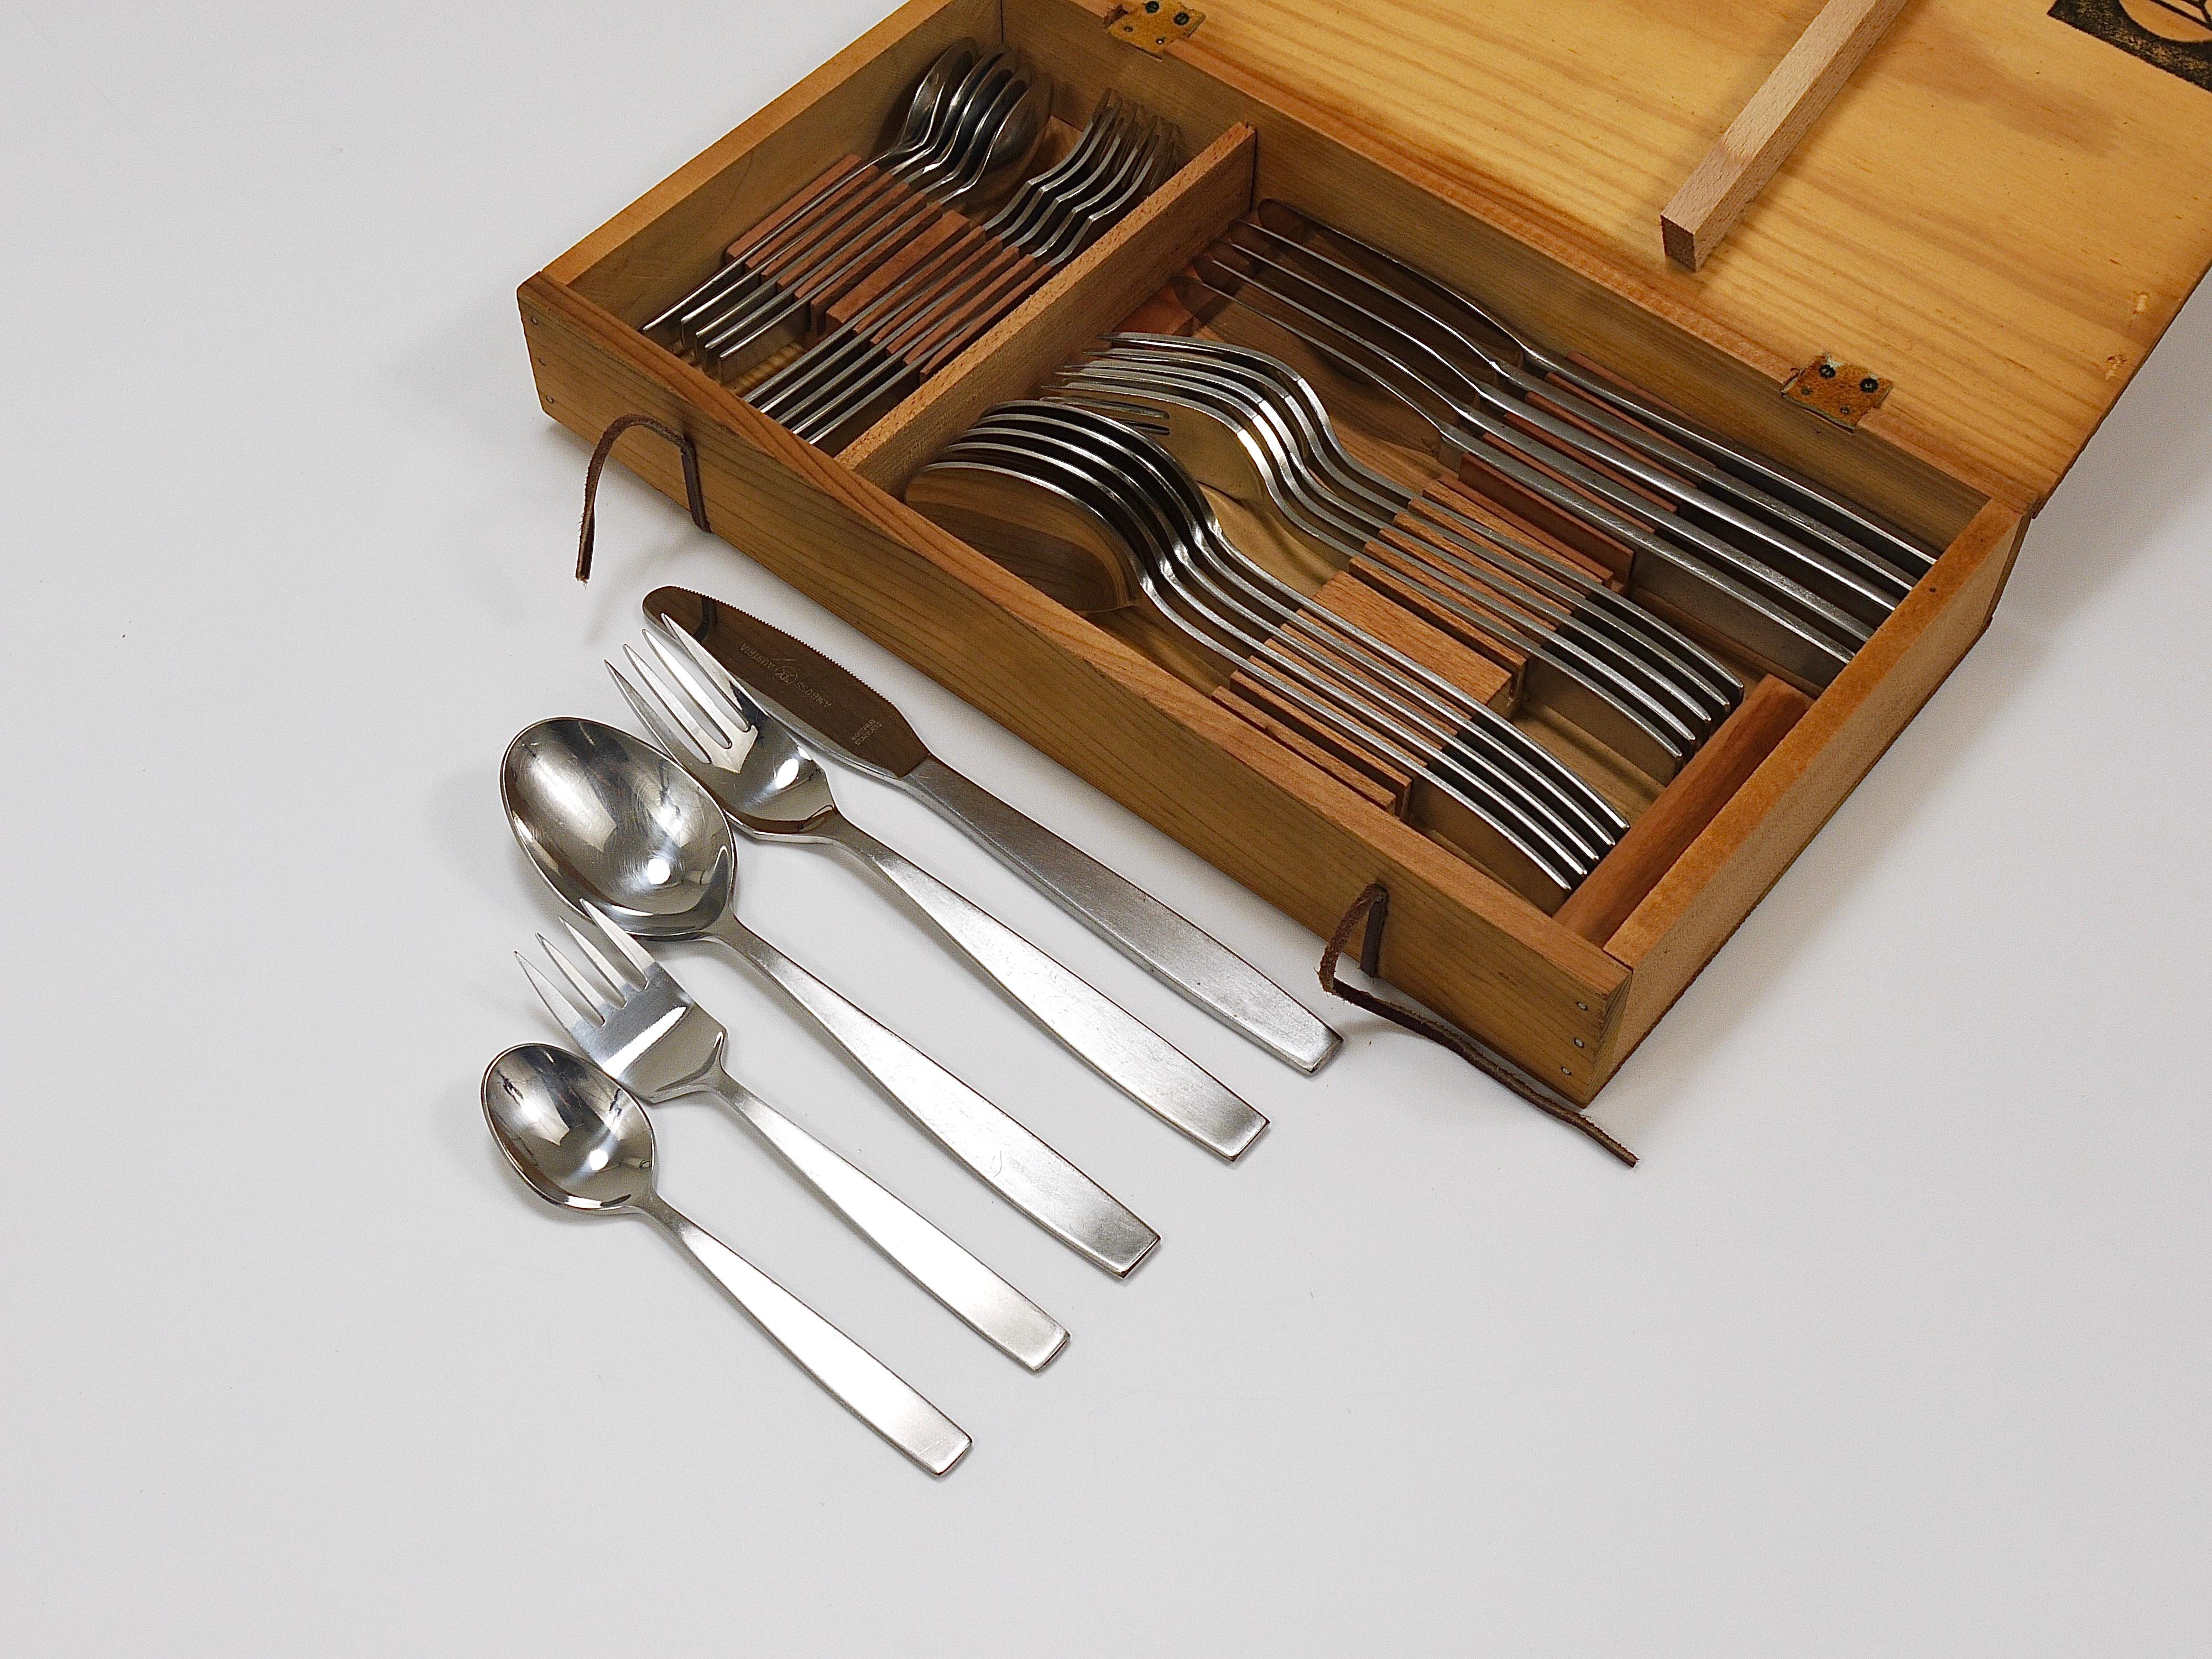 Beautiful Mid-century flatware, 2050 series, designed by Helmut Alder, executed by Amboss Austria in the 1950s. High-quality flatware, made of solid, brushed and polished stainless steel. Comes in its original award-winning handmade wooden box.